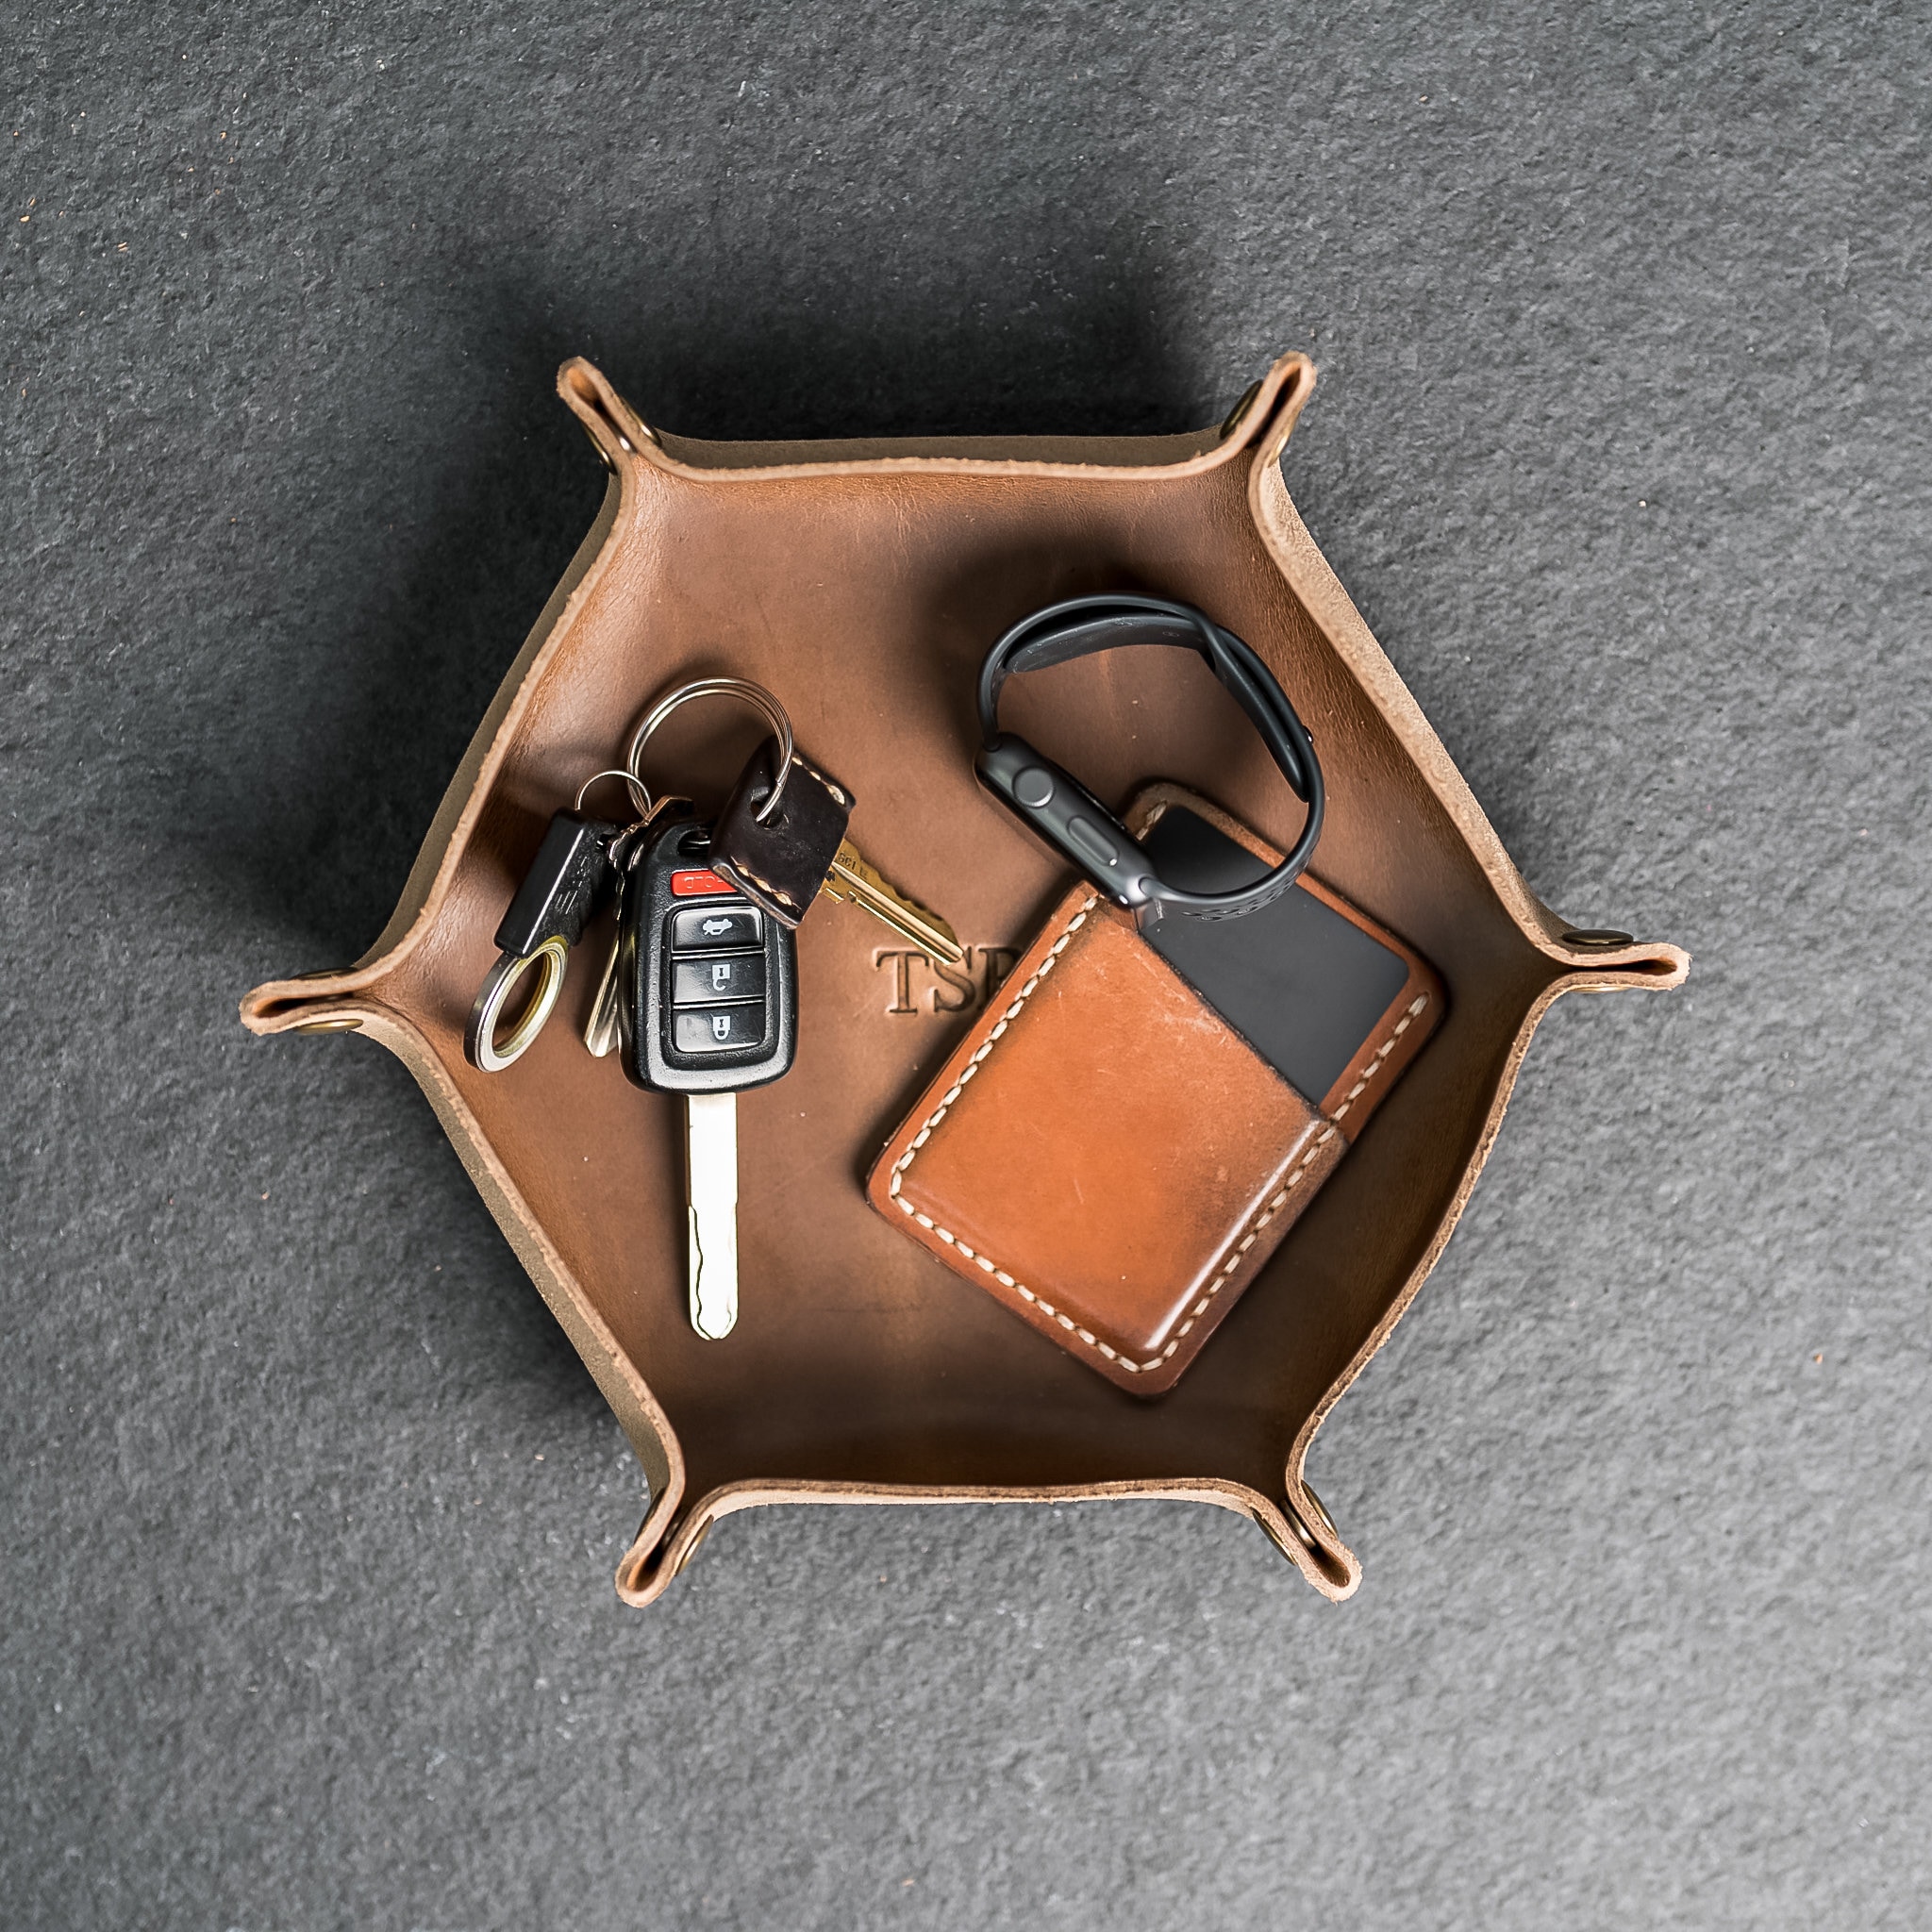 The 9 Best EDC Valet Trays to Stay Organized in 2023